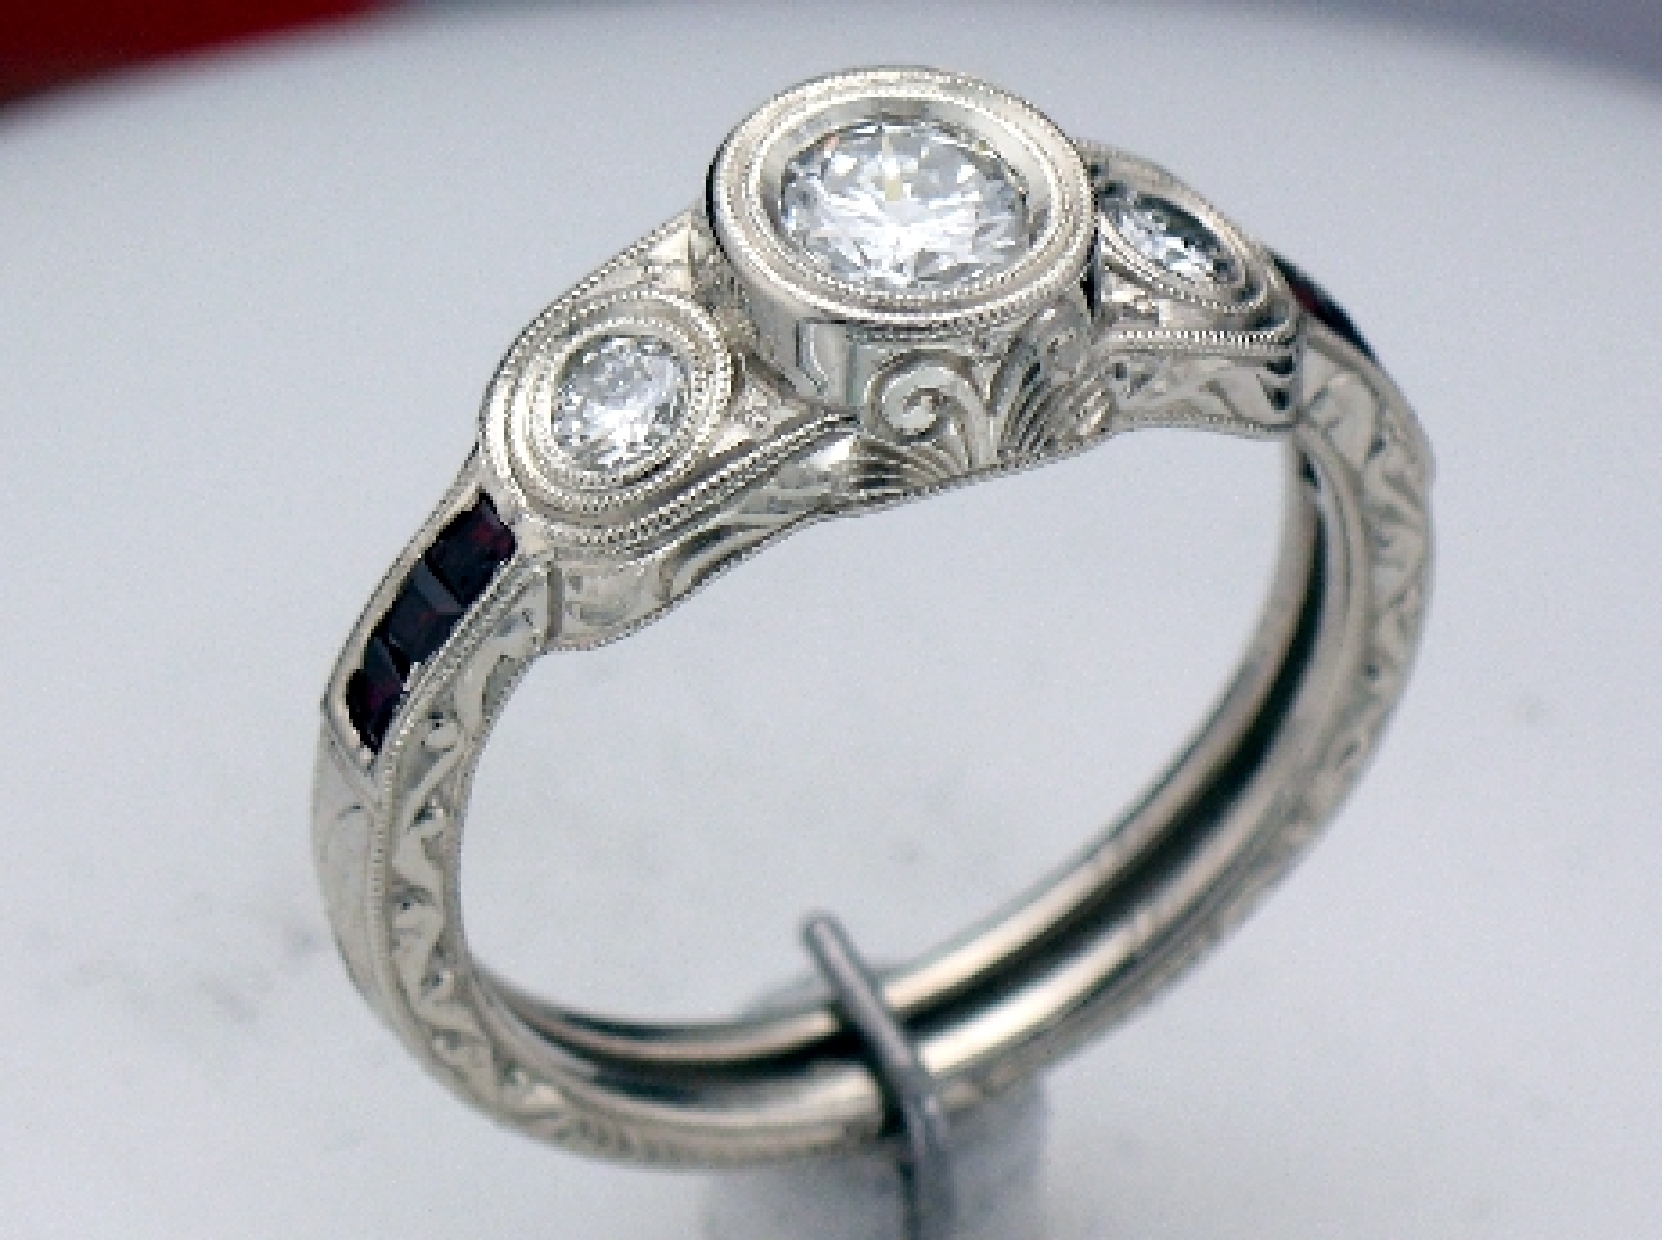 Hand engraved white gold ring with 3 round brilliant diamonds and side baquette rubies.